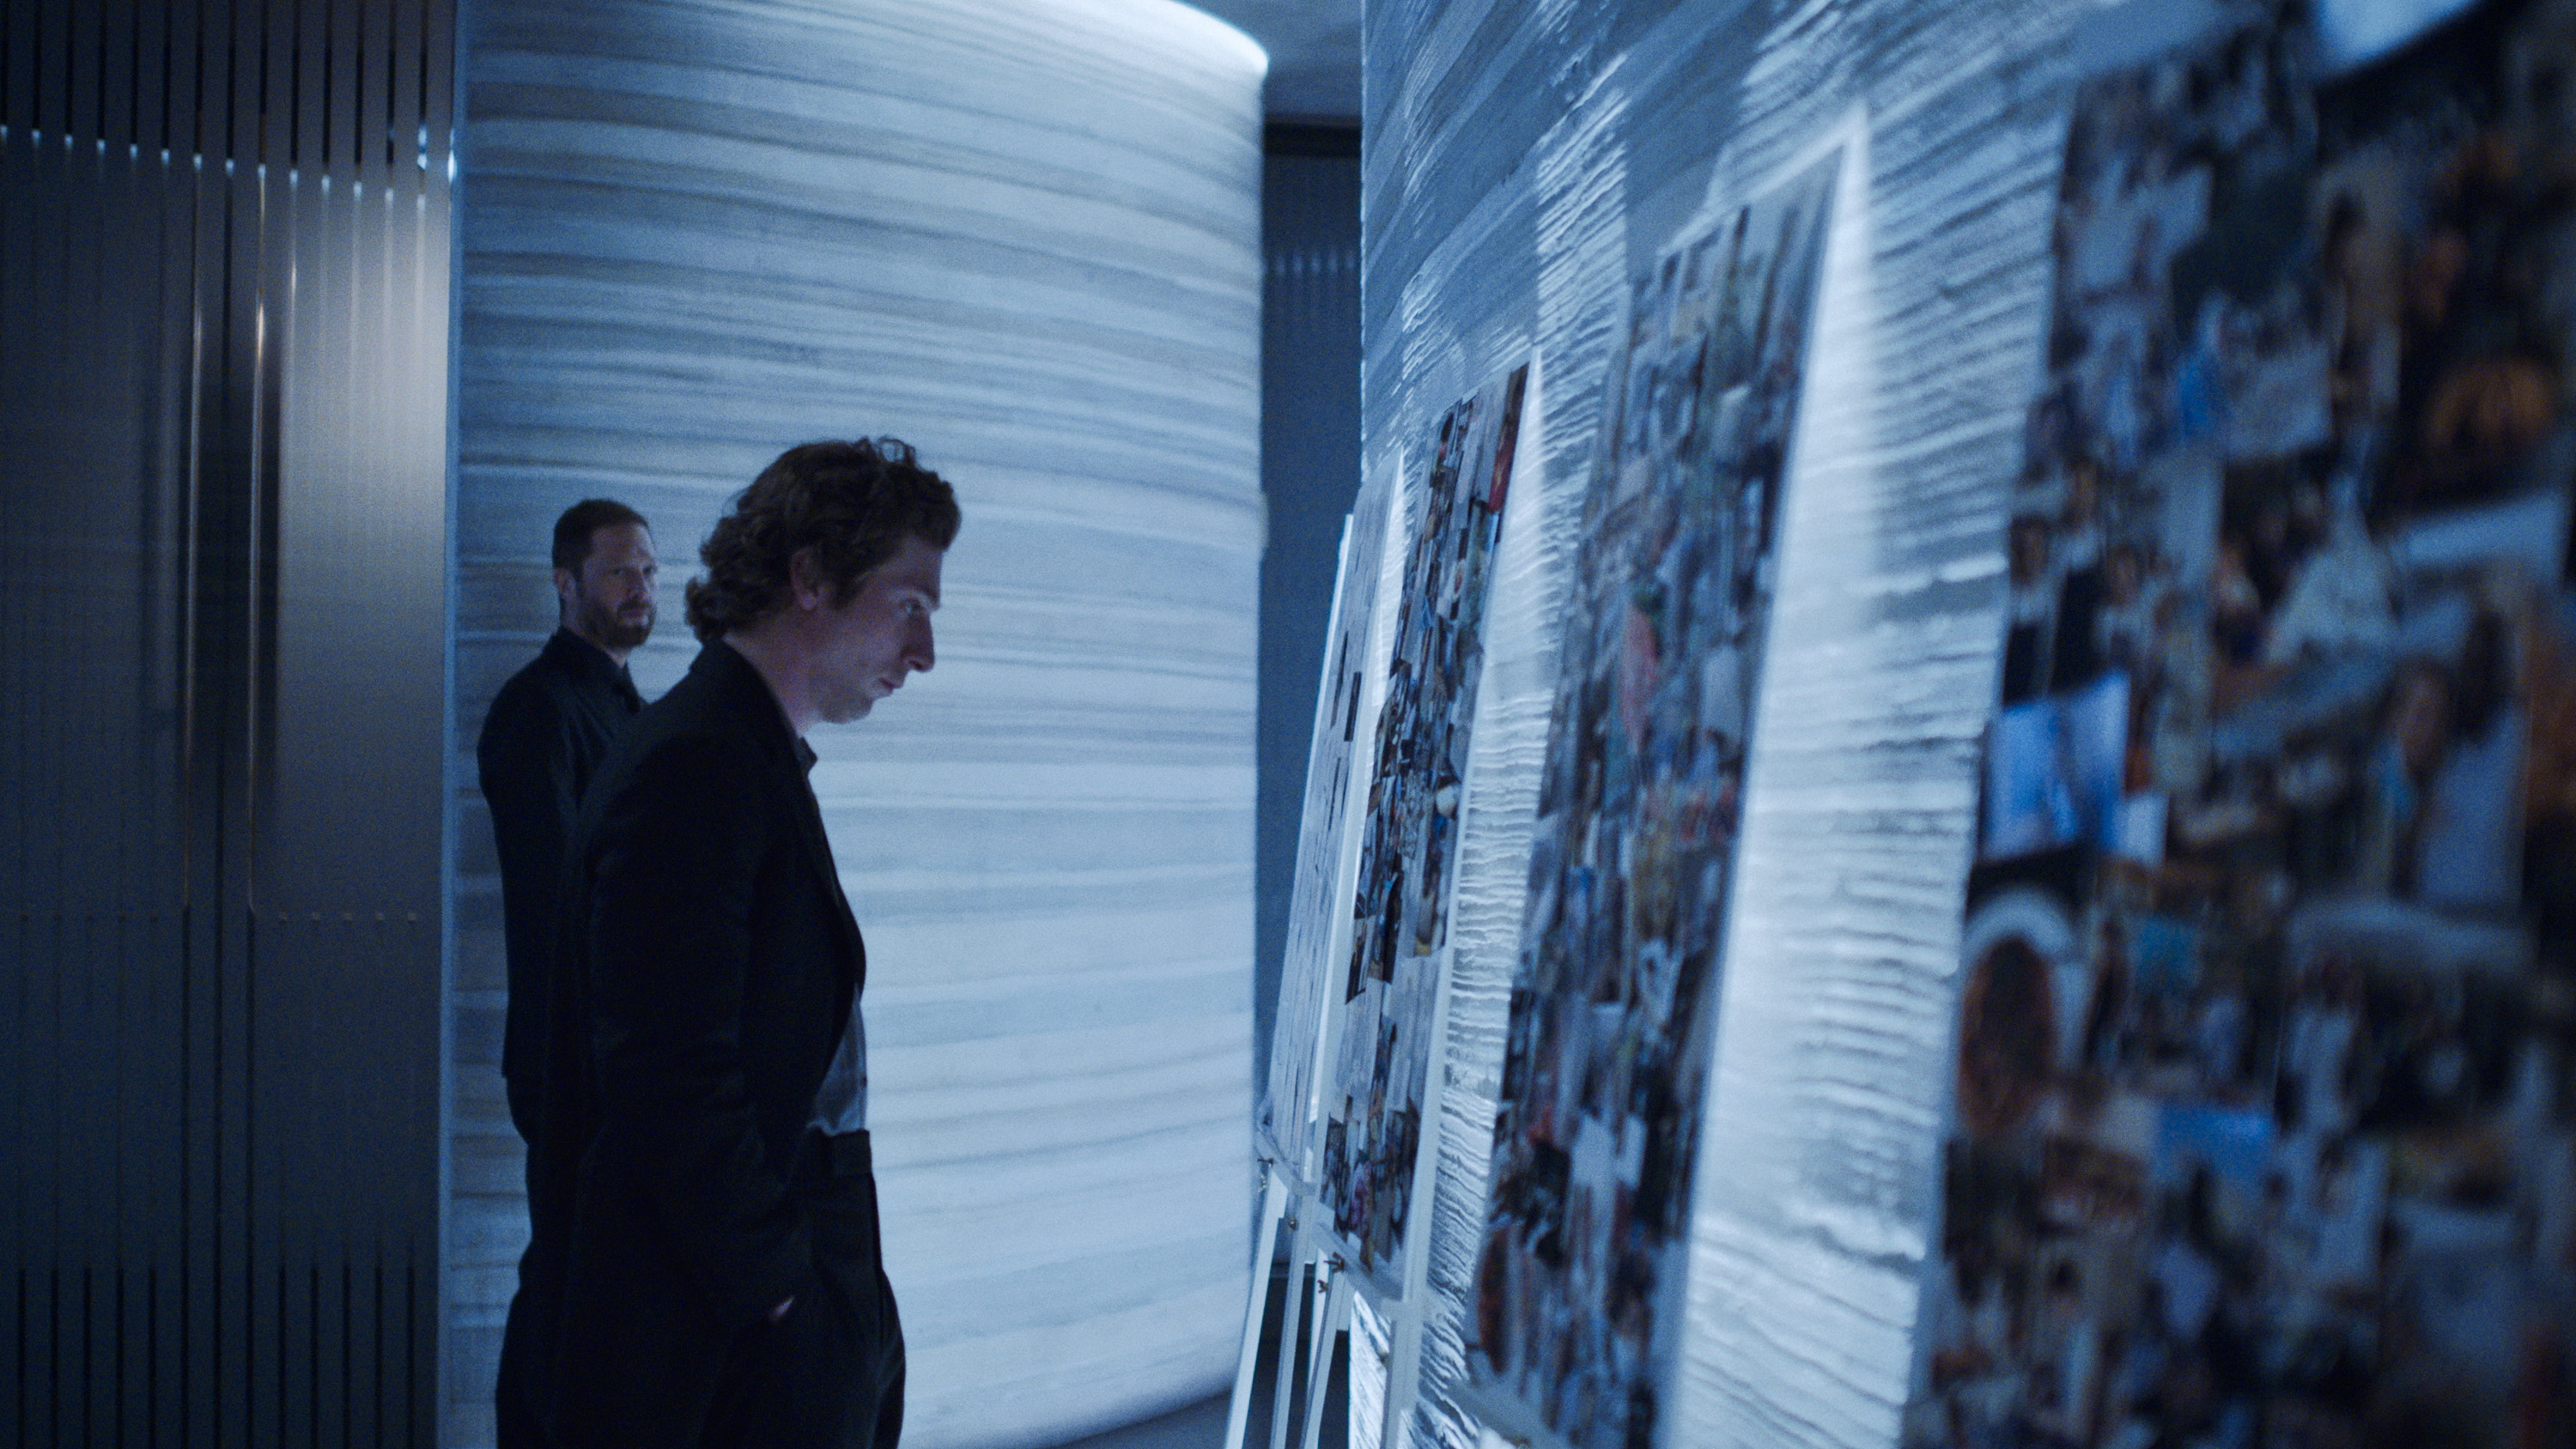 Jeremy Allen White as Carmy Berzatto in The Bear, gazing at a steely collage of photos